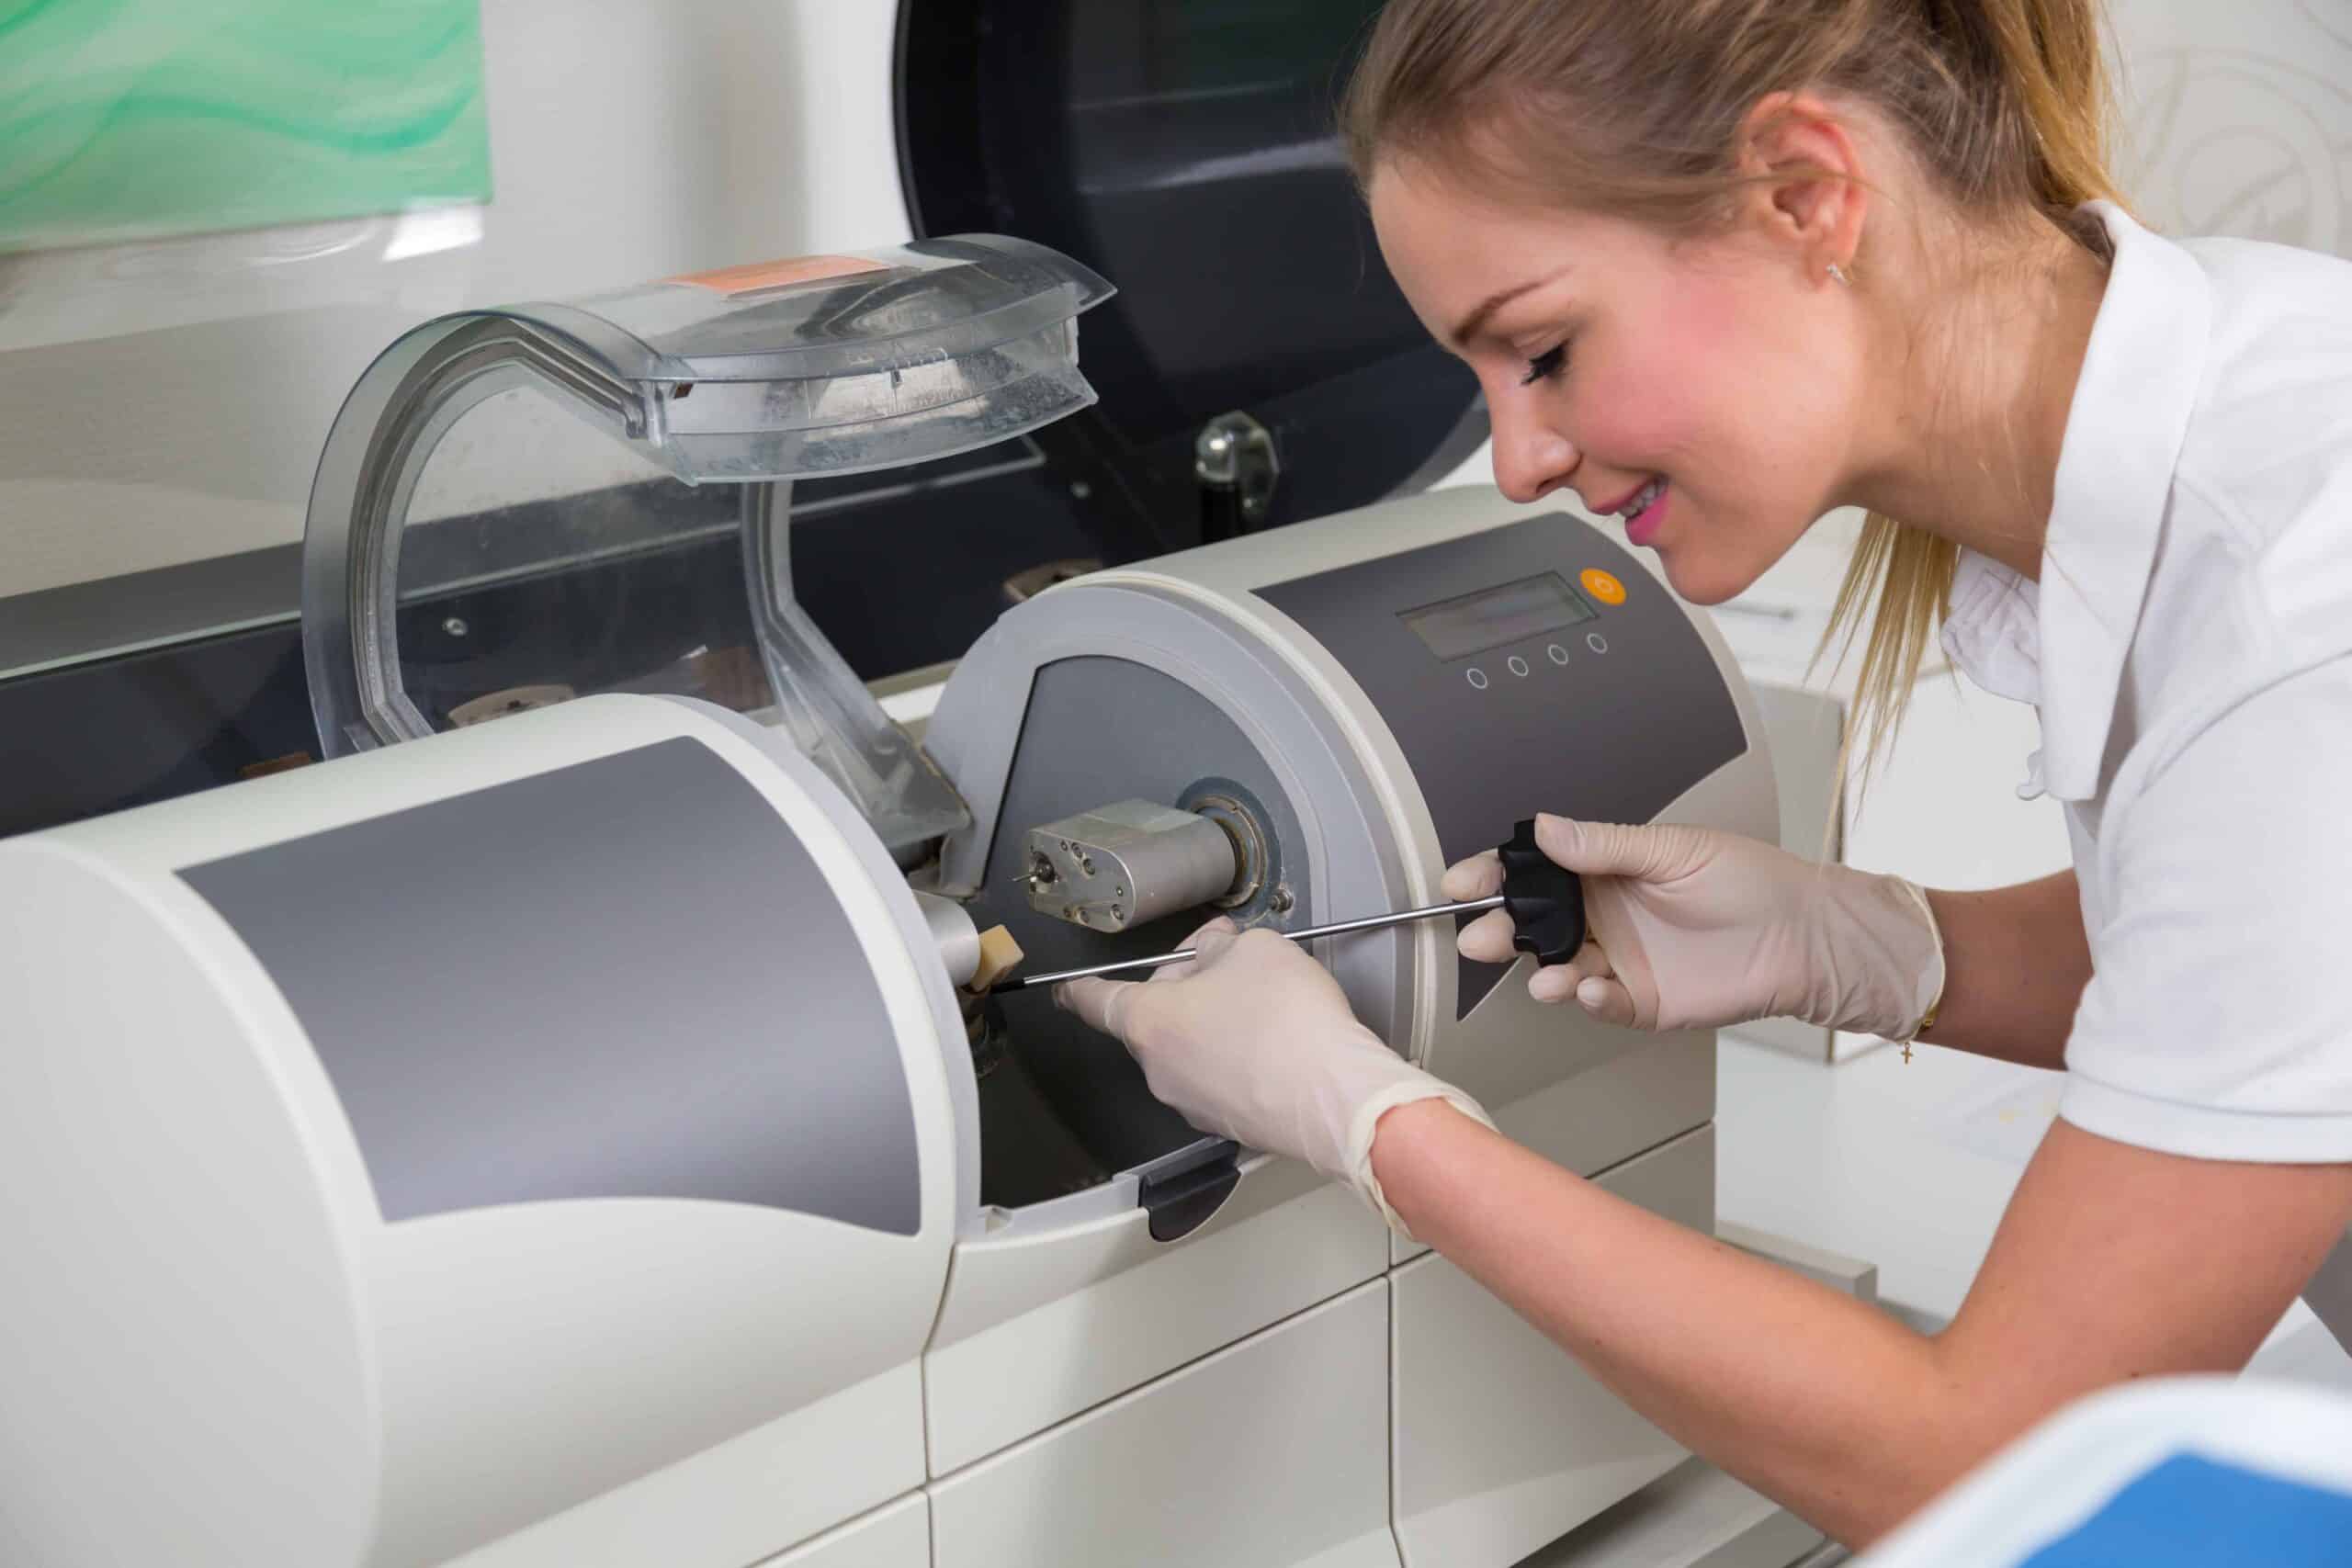 CEREC milling machine shows digital dentistry in action